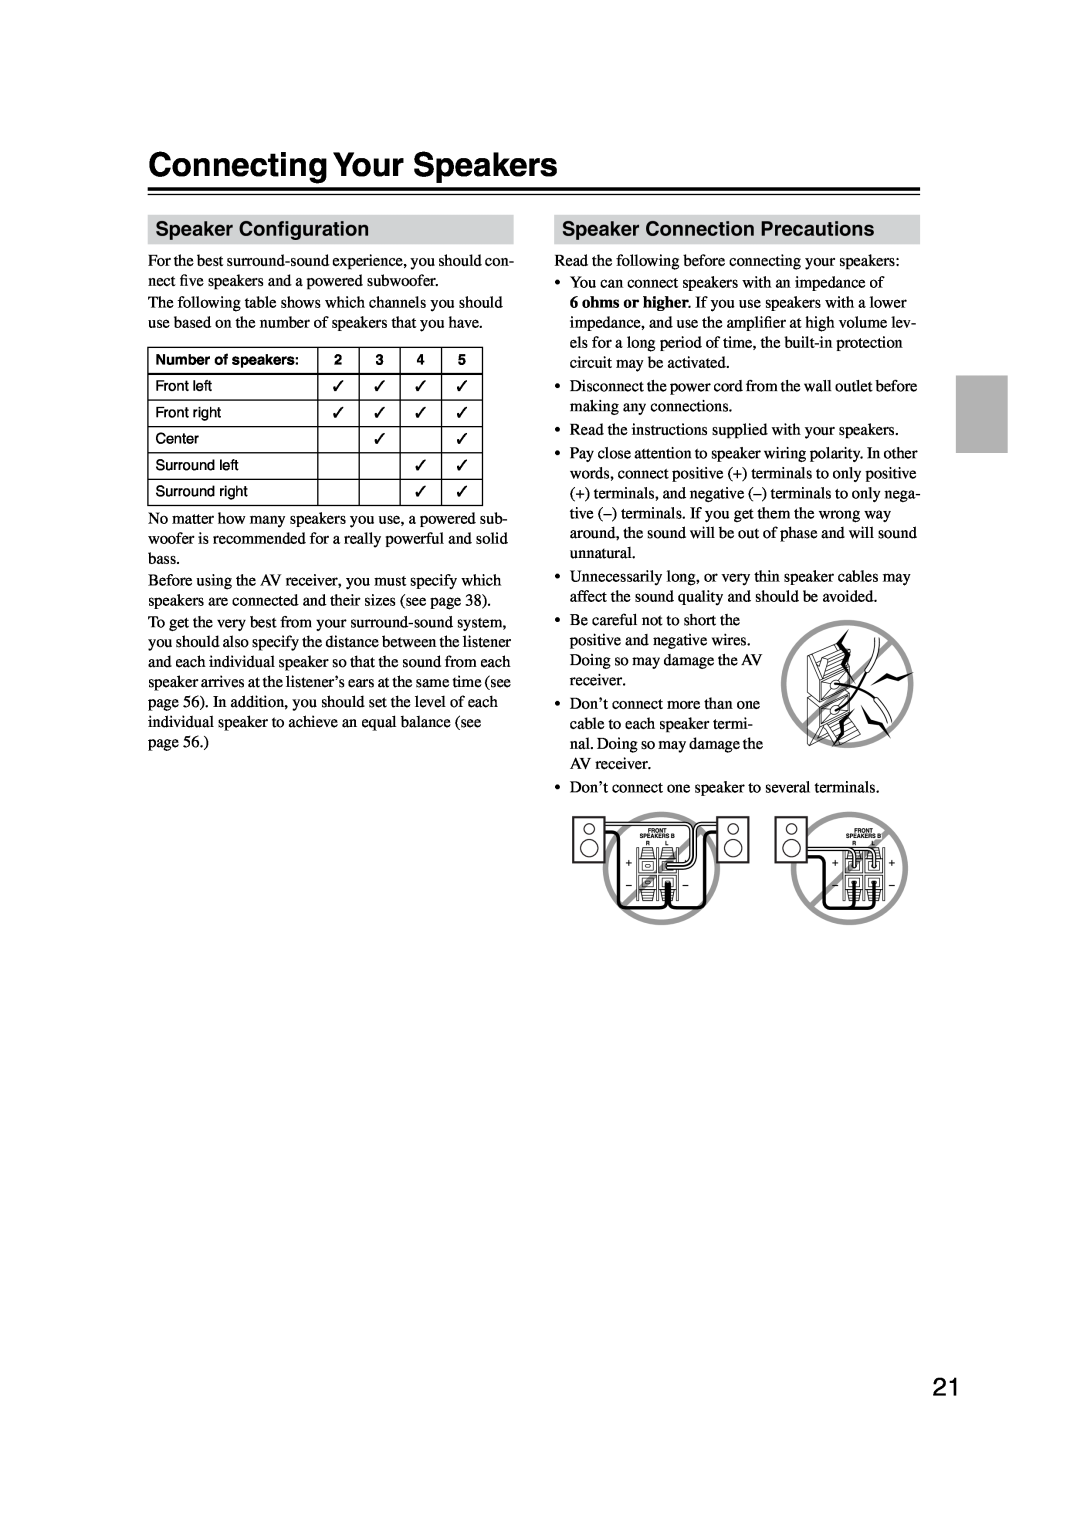 Onkyo HT-S4100 instruction manual Connecting Your Speakers, Speaker Conﬁguration, Speaker Connection Precautions 